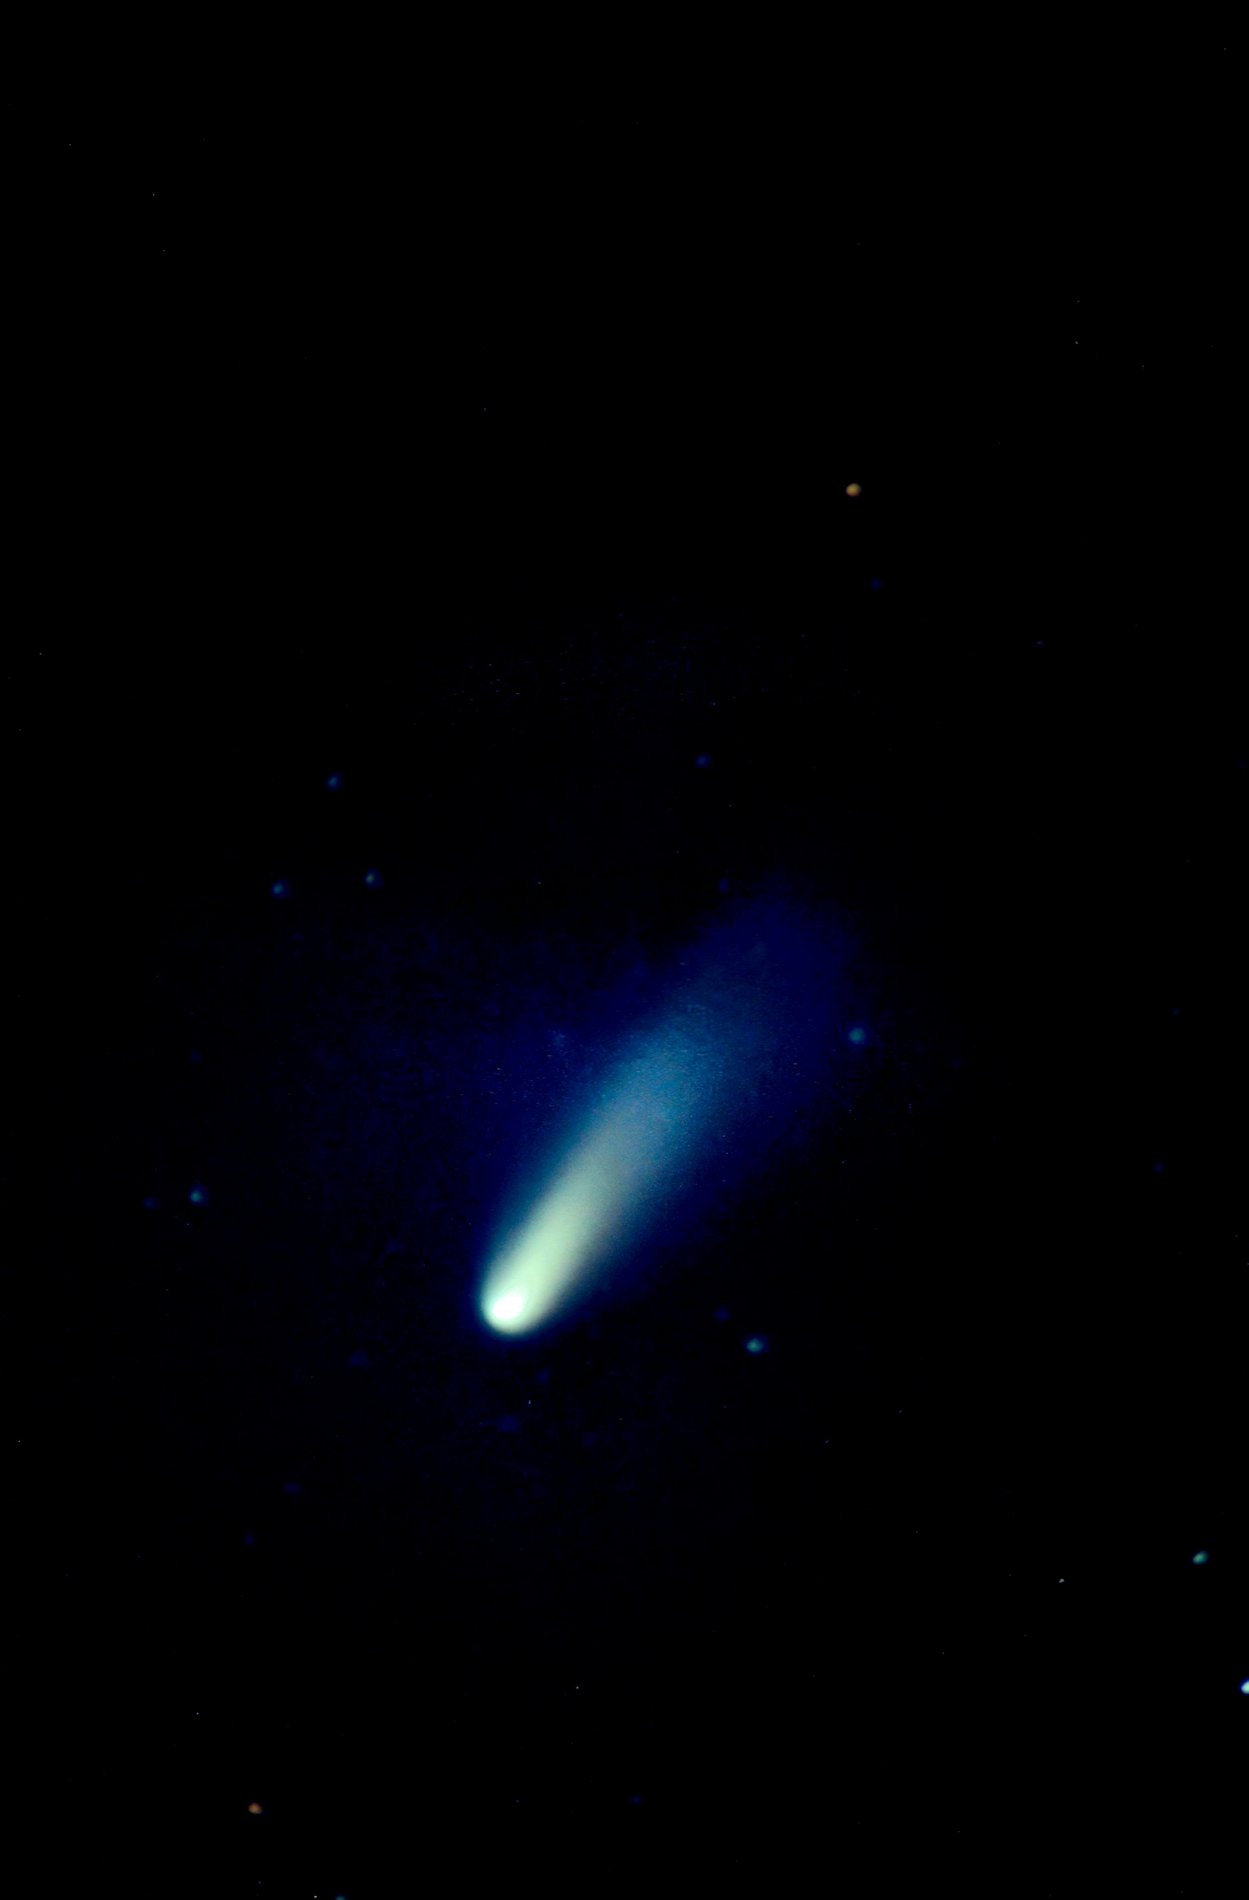 Found  some old Pictures I made of Hale Bopp Comet-1